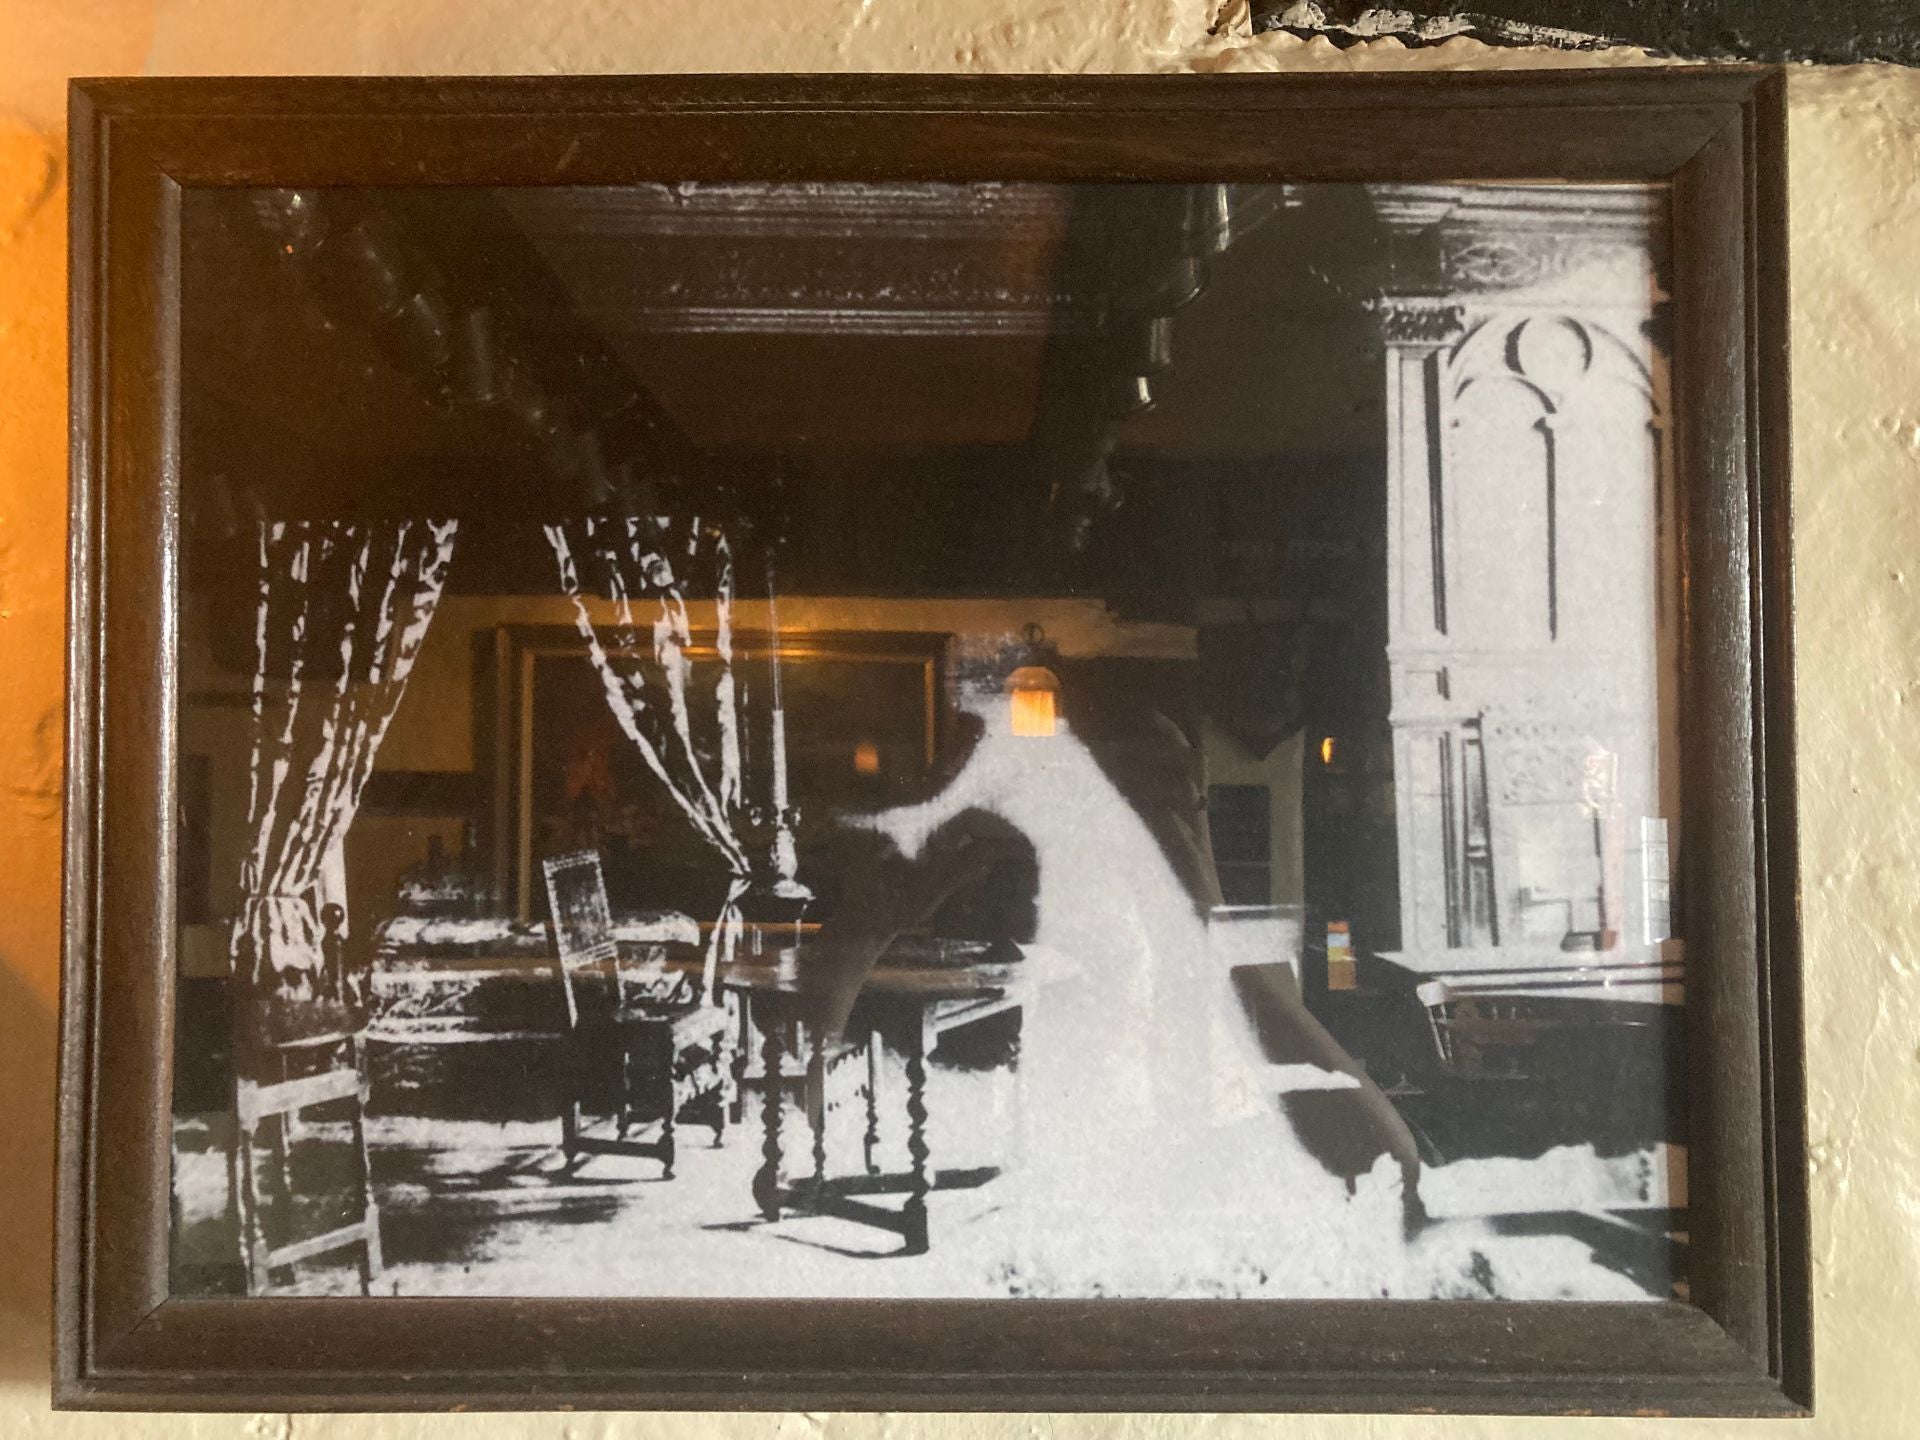 A ghostly figure appears on an old painting 